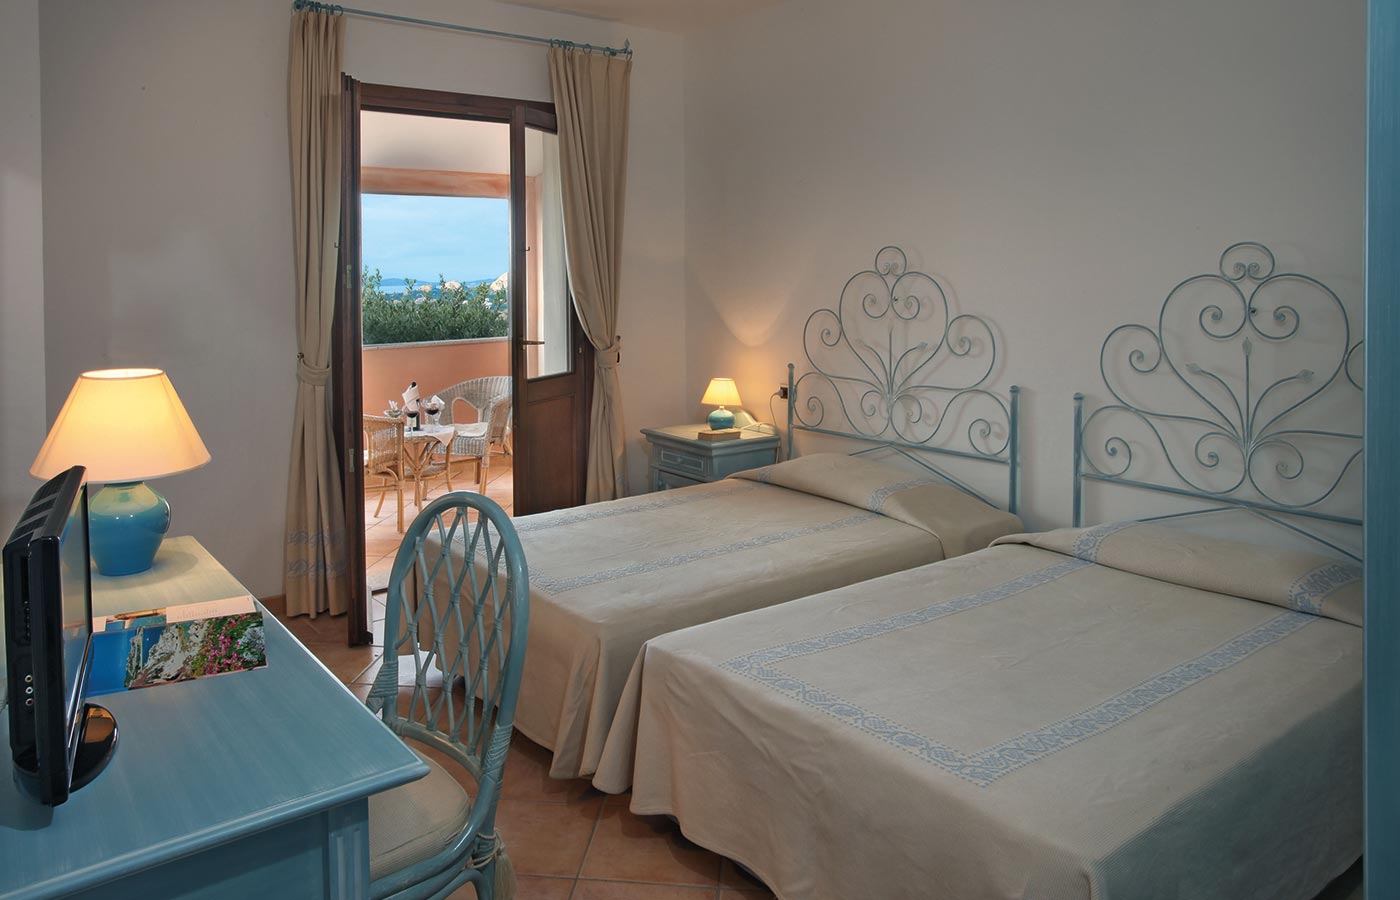 Dream rooms at your dream holiday accommodation in Sardinia